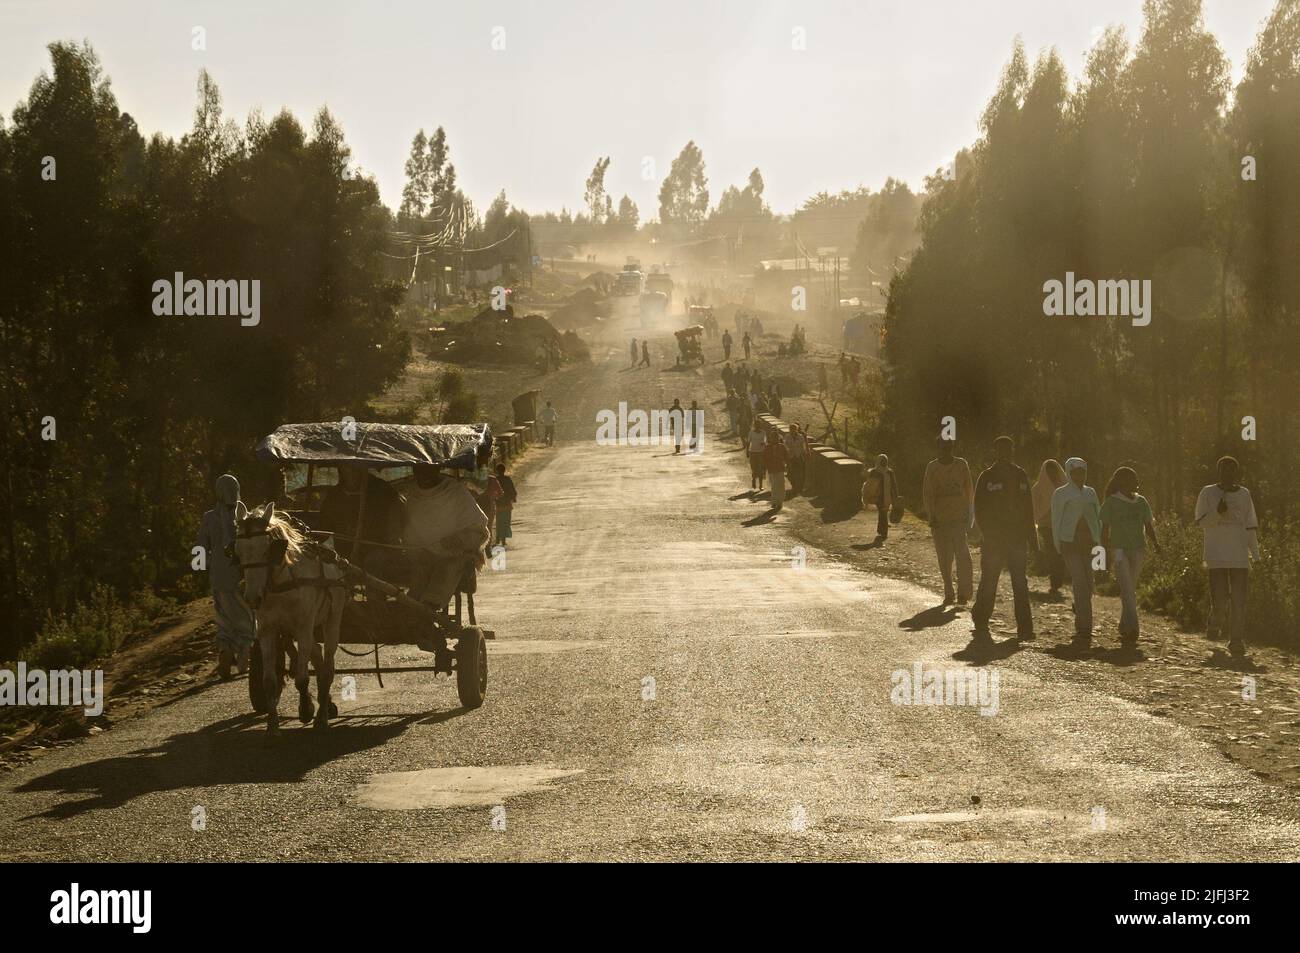 Pedestrians and cart on a road under construction, Amhara Region, Ethiopia Stock Photo